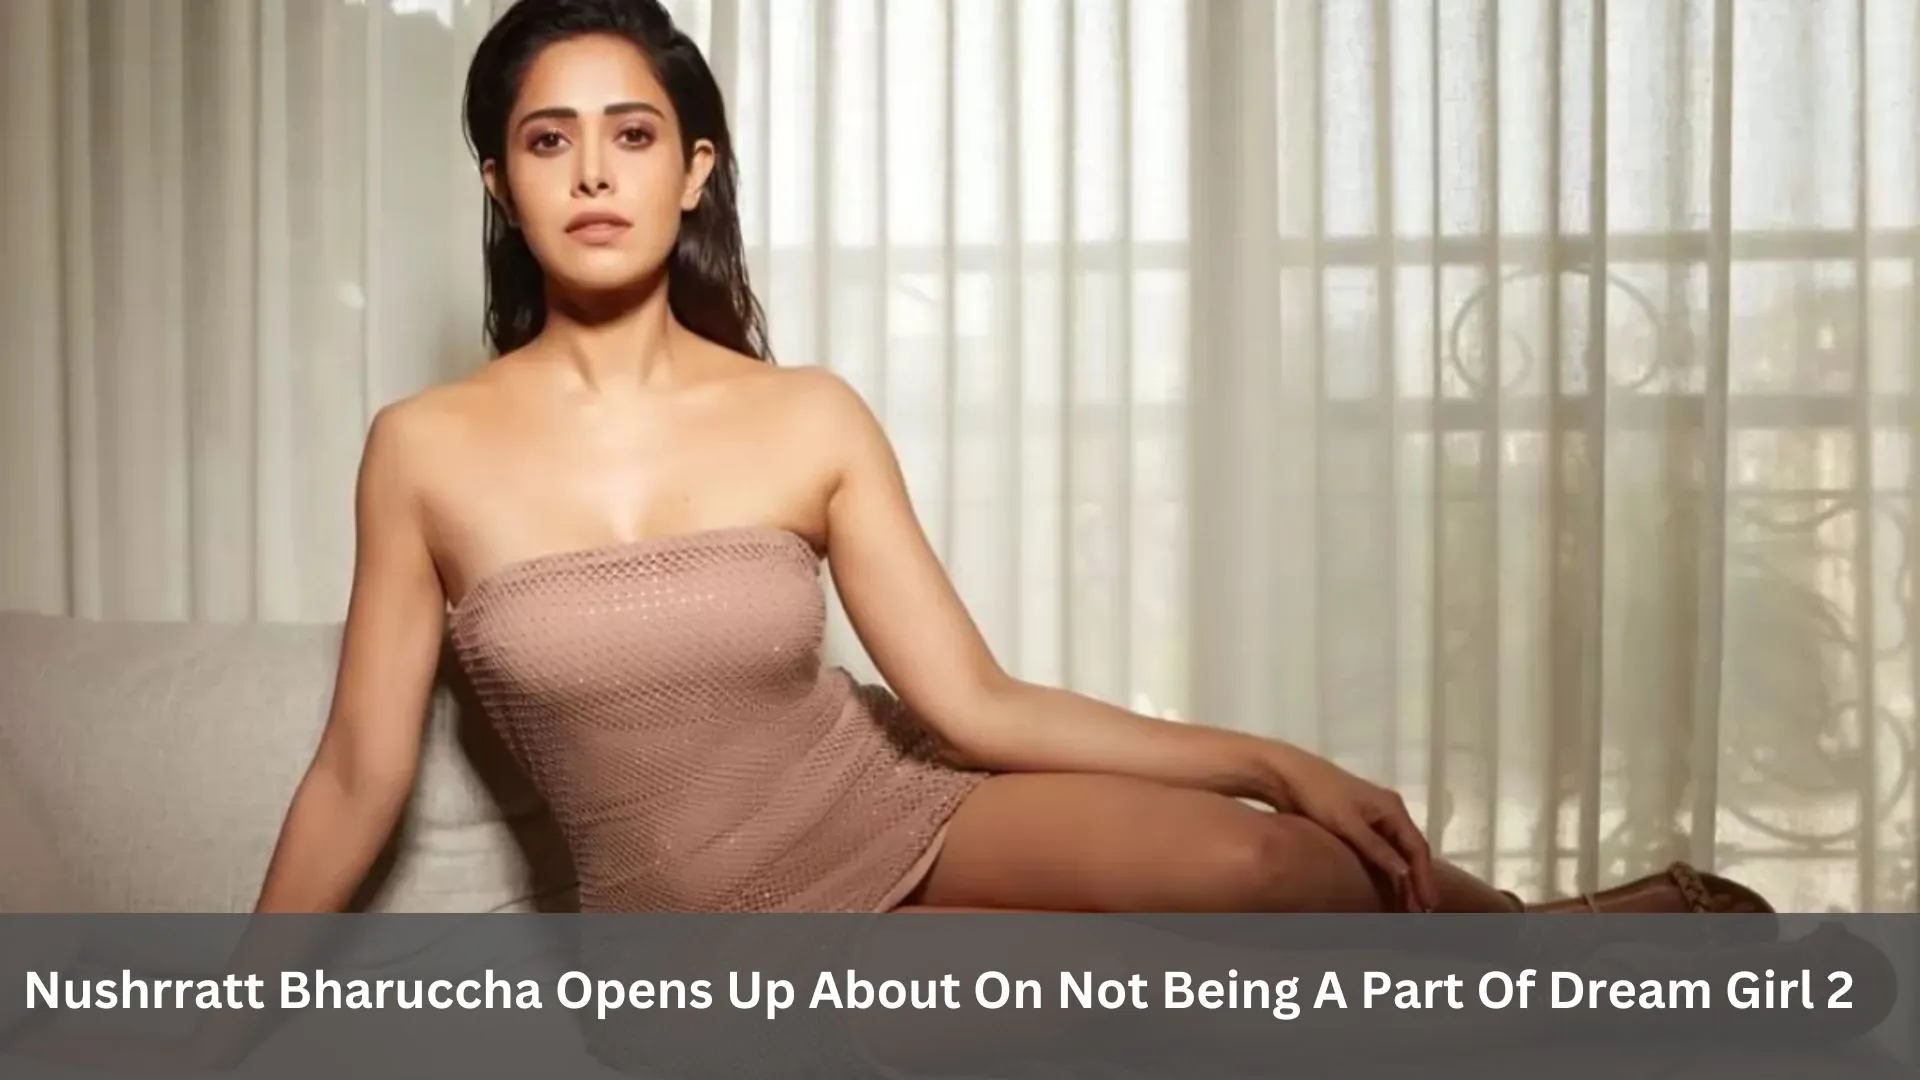 Nushrratt Bharuccha Opens Up About On Not Being A Part Of Dream Girl 2